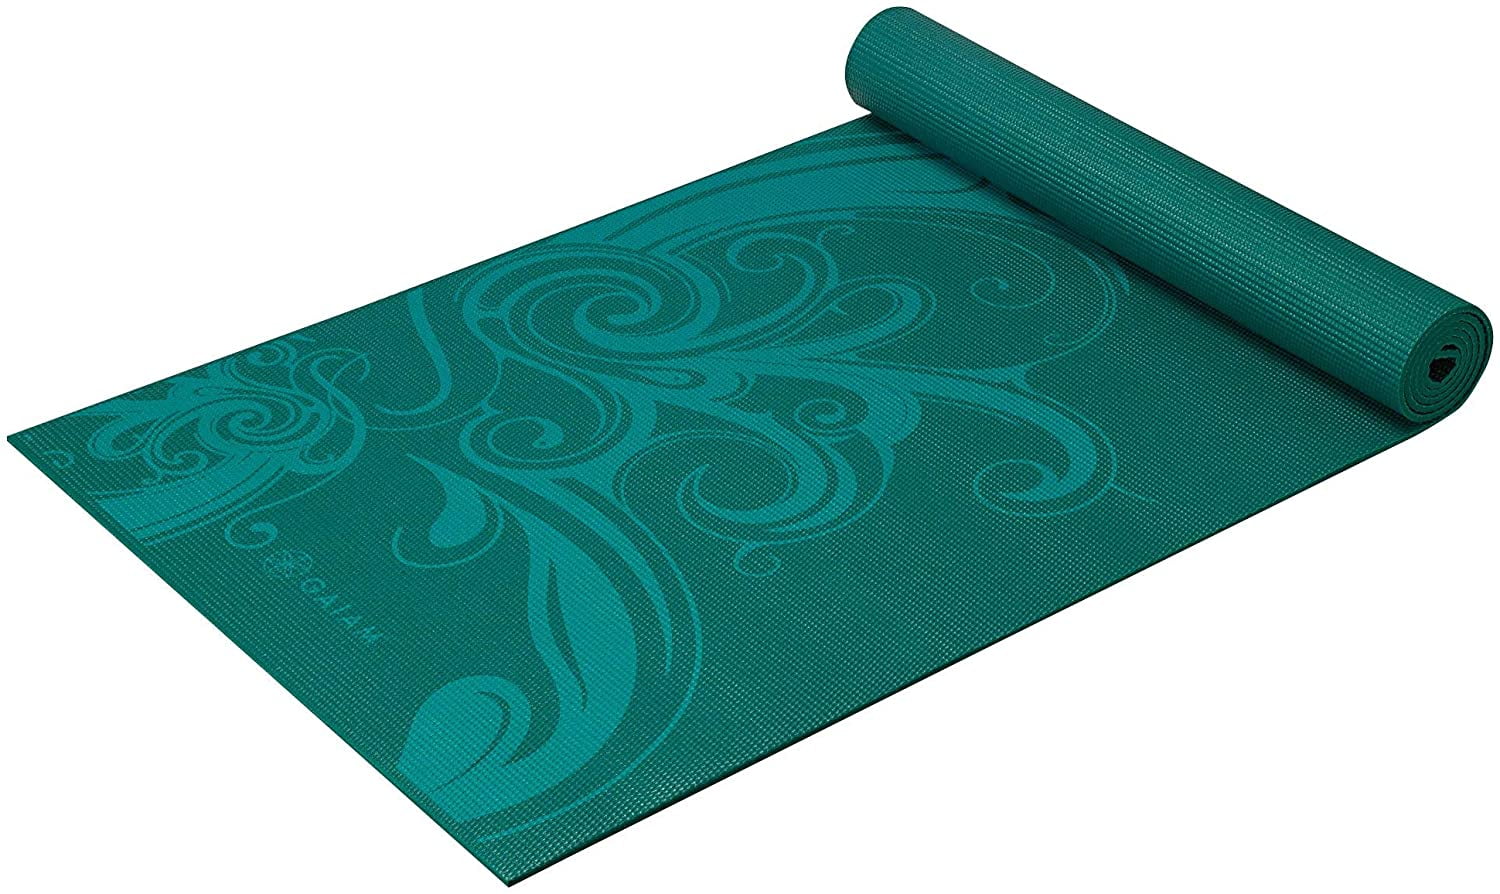 Gaiam Yoga Mat - Premium 6mm Print Extra Thick Non Slip Exercise & Fitness  Mat for All Types of Yoga, Pilates & Floor Workouts (68L x 24W x 6mm  Thick) Turquoise Surf 